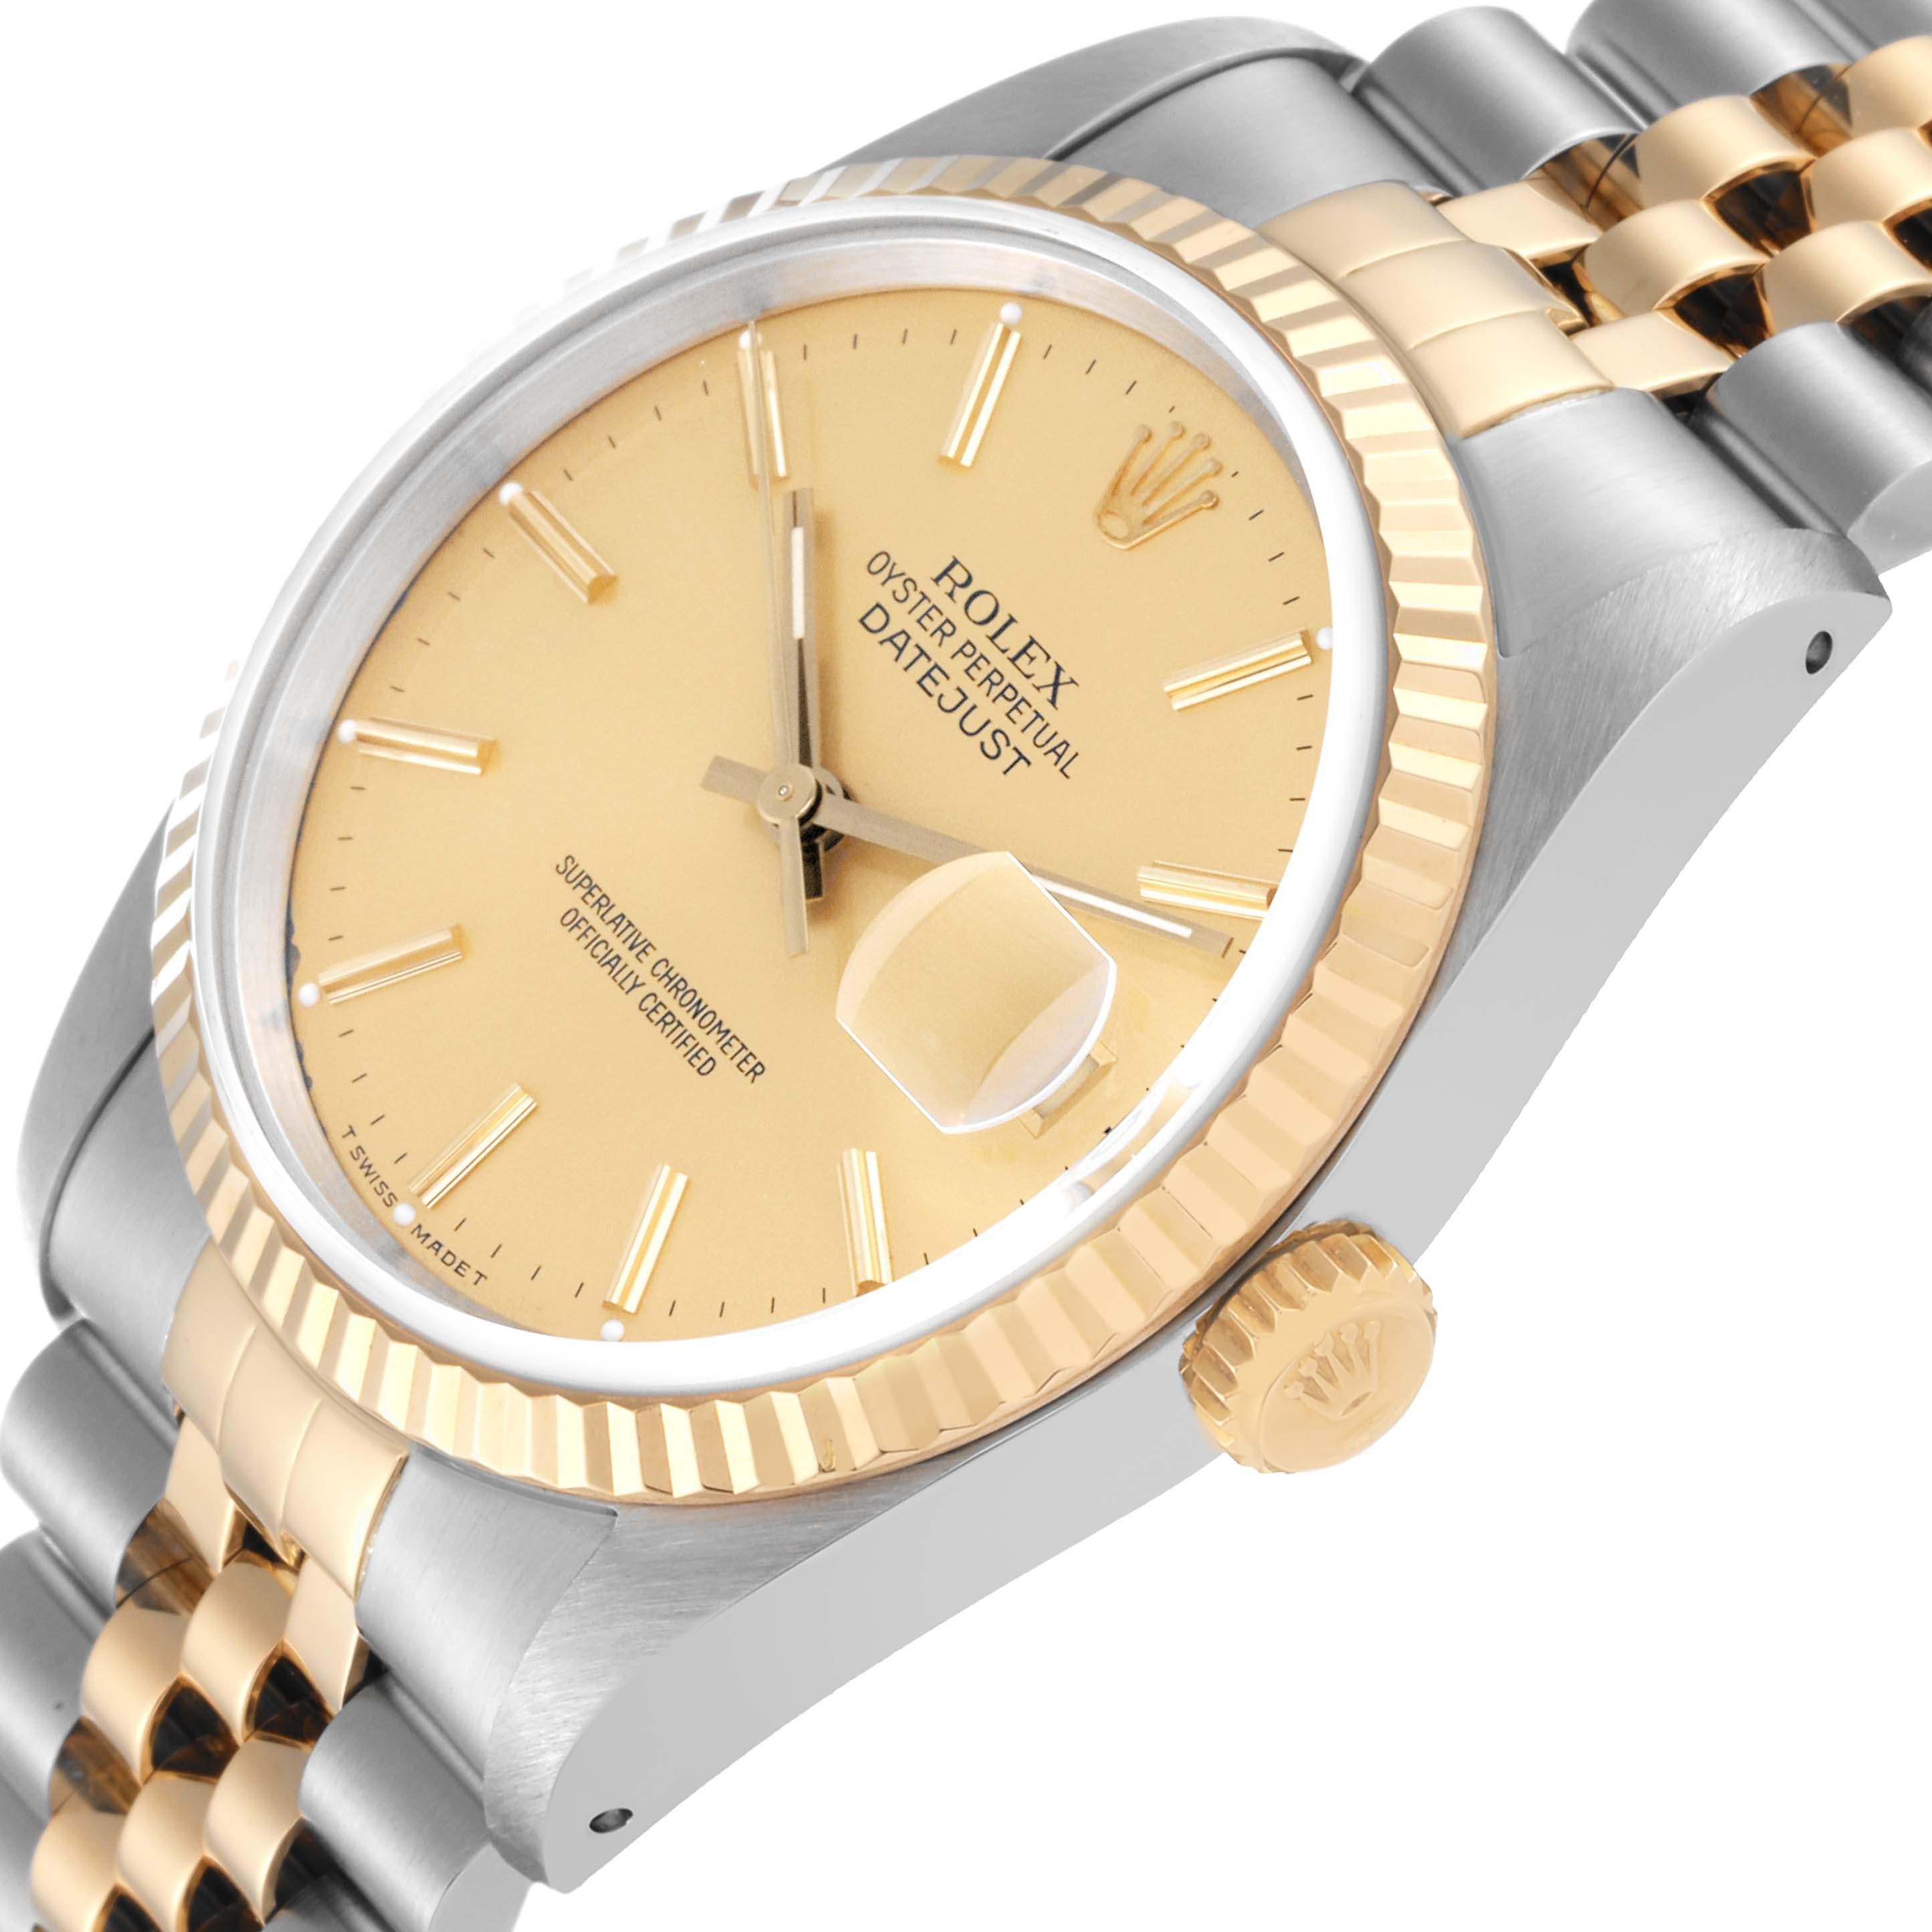 Rolex Datejust 36 Steel Yellow Gold Champagne Dial Mens Watch 16233 Box Papers For Sale 6